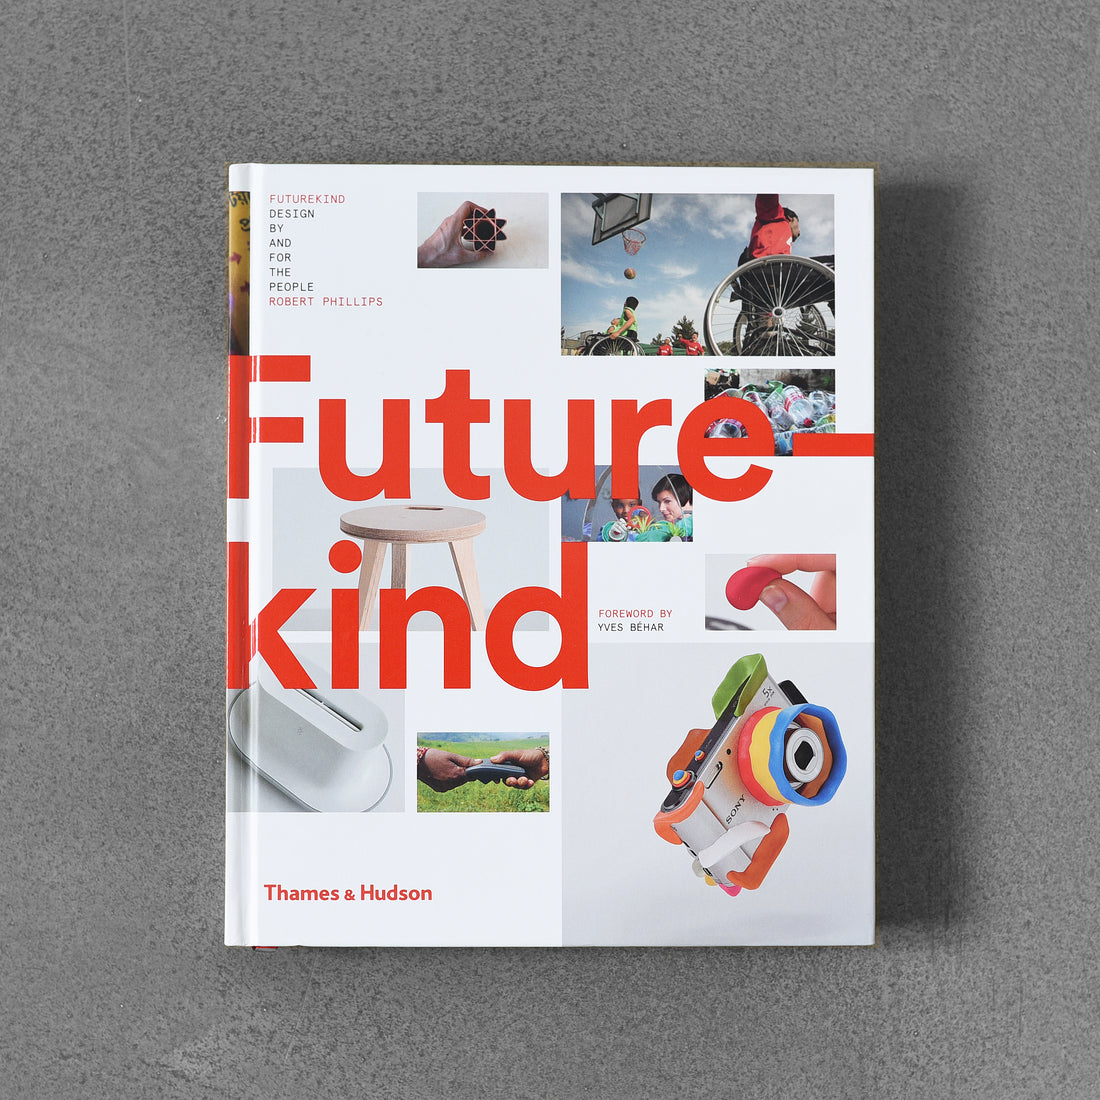 Future-kind: Design by and for the People